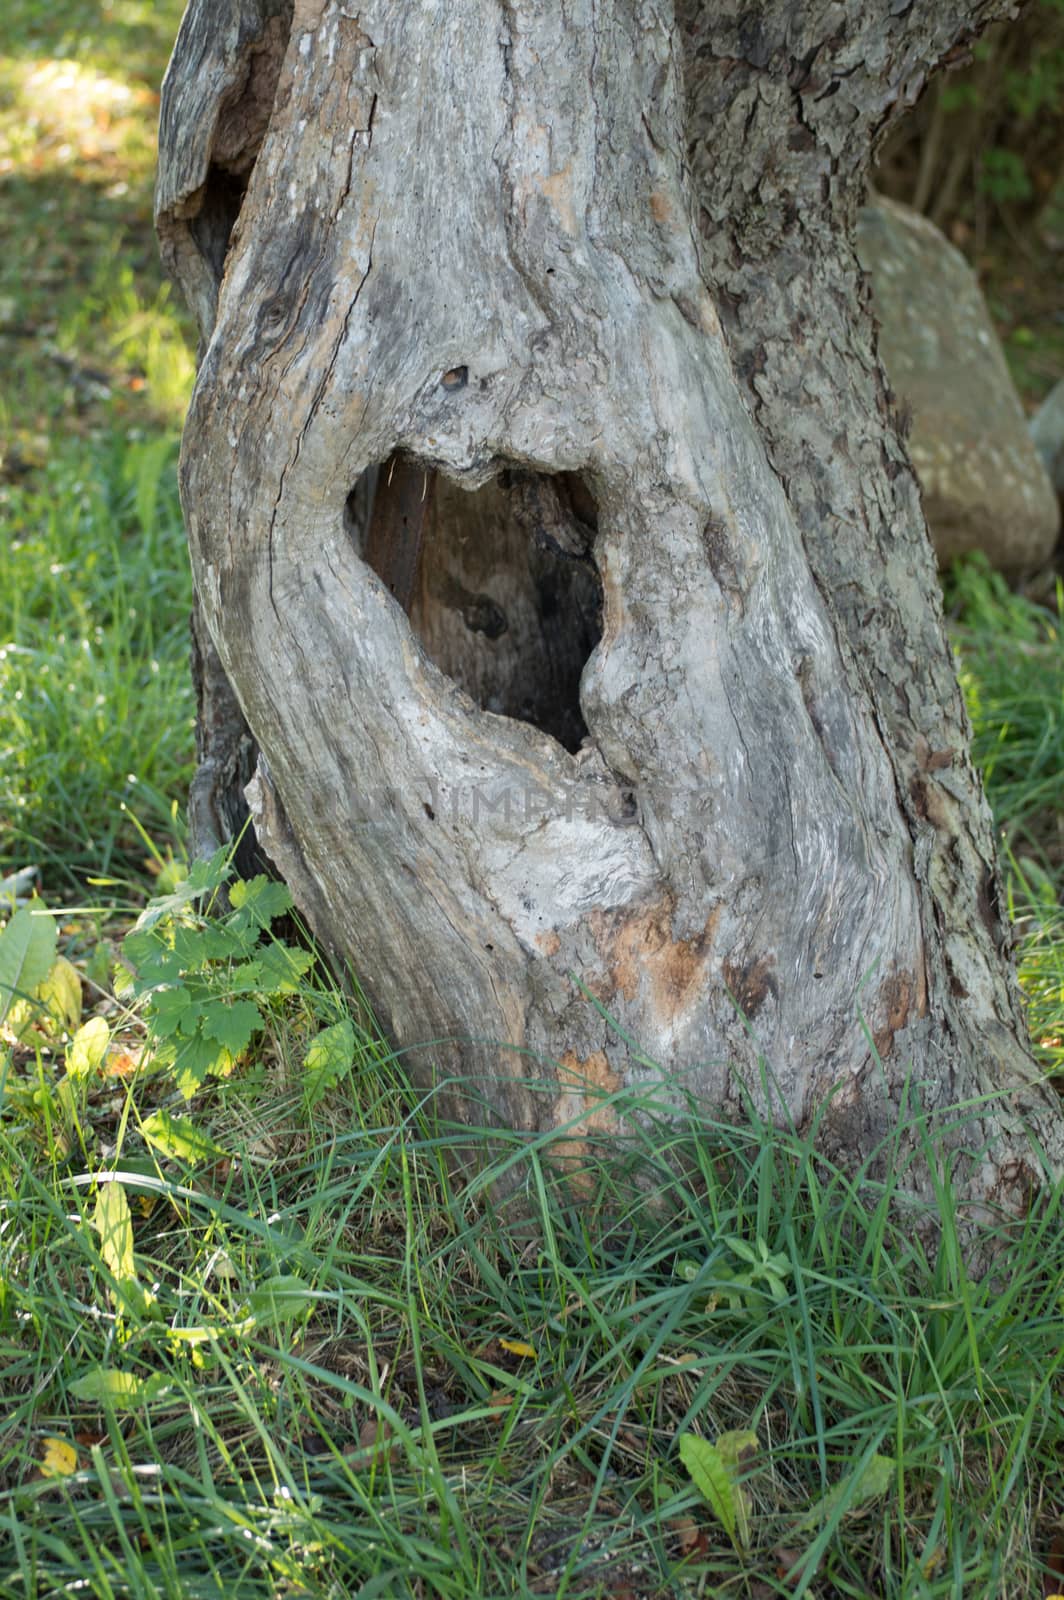 An old apple tree with a natural heart shaped hole in the old hollow tree trunk